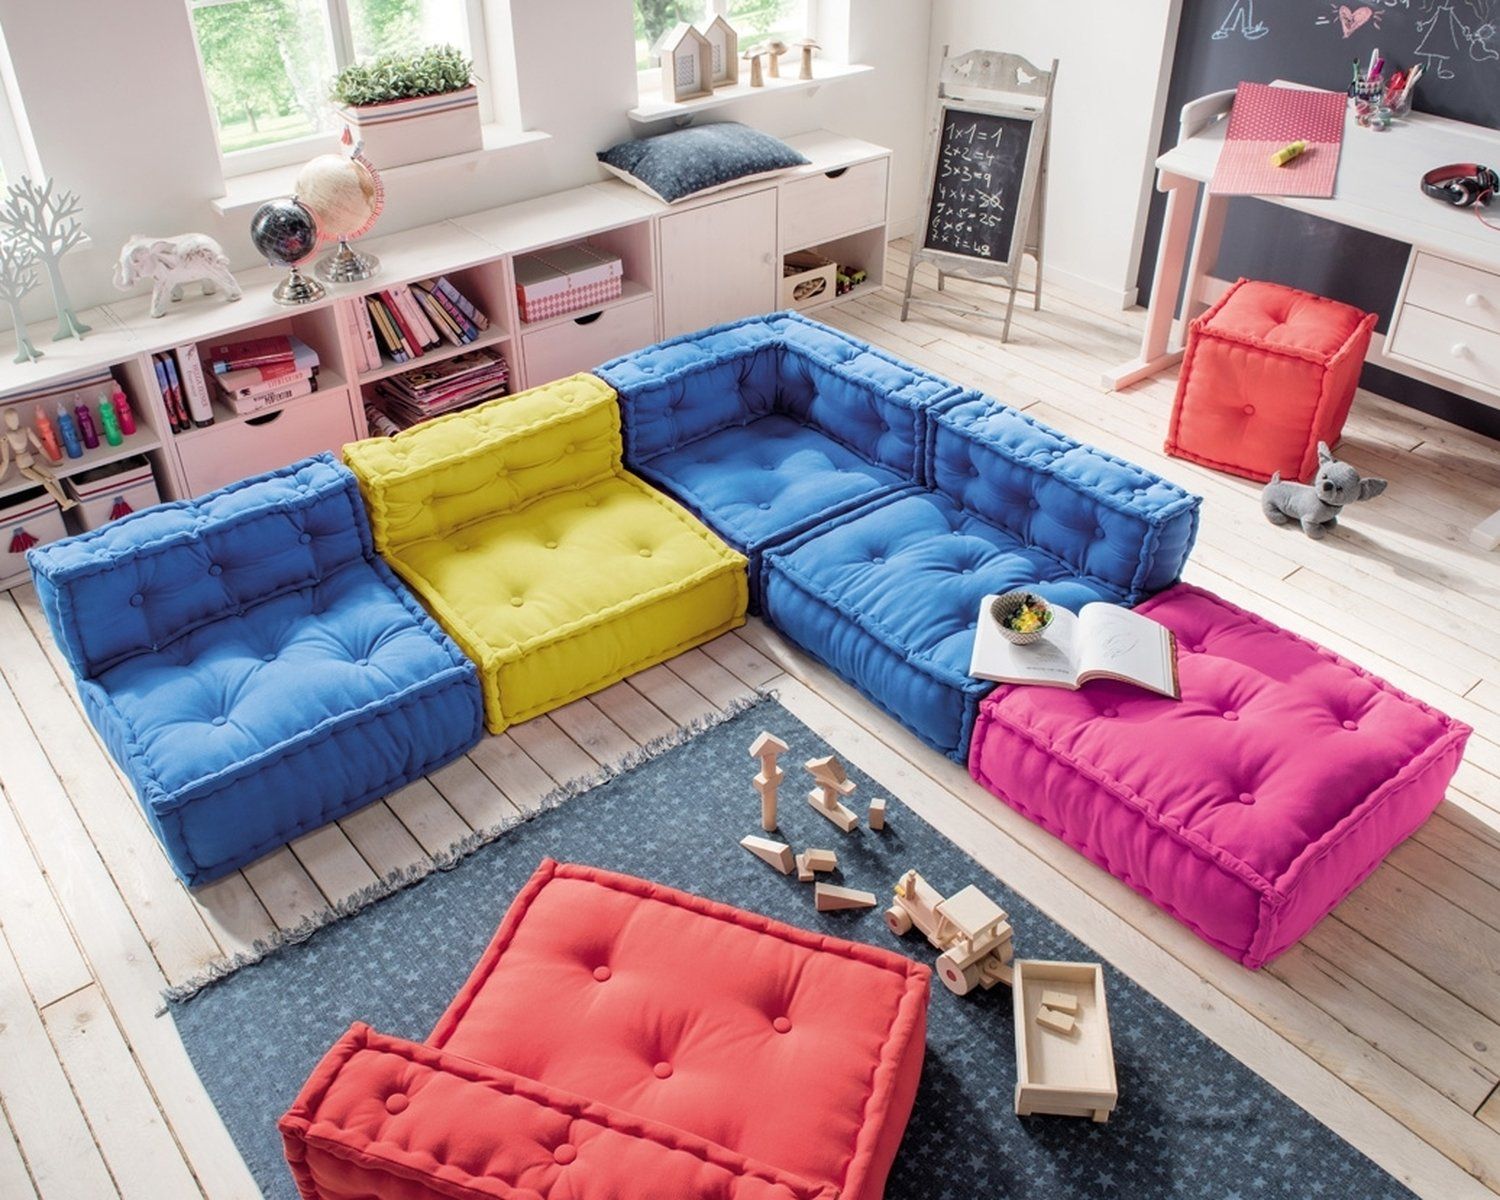 playroom, blue pink yellow floor sofa, wooden floor, white cabinet and shelves, white table, orange square ottoman, dark grey rug